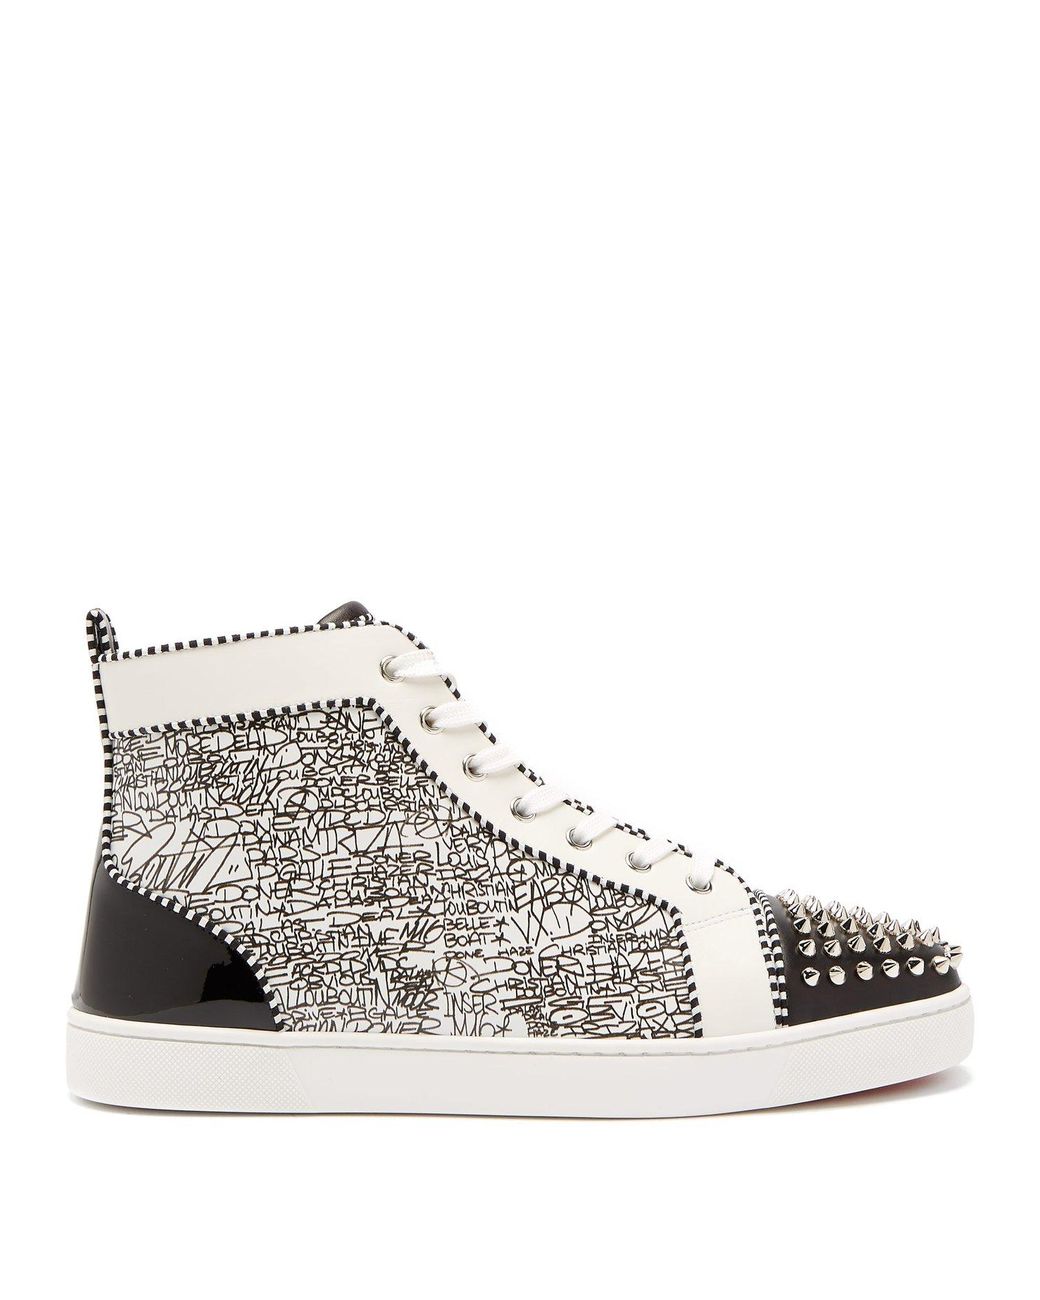 Christian Louboutin Graffiti High Top Trainers for Men | Lyst